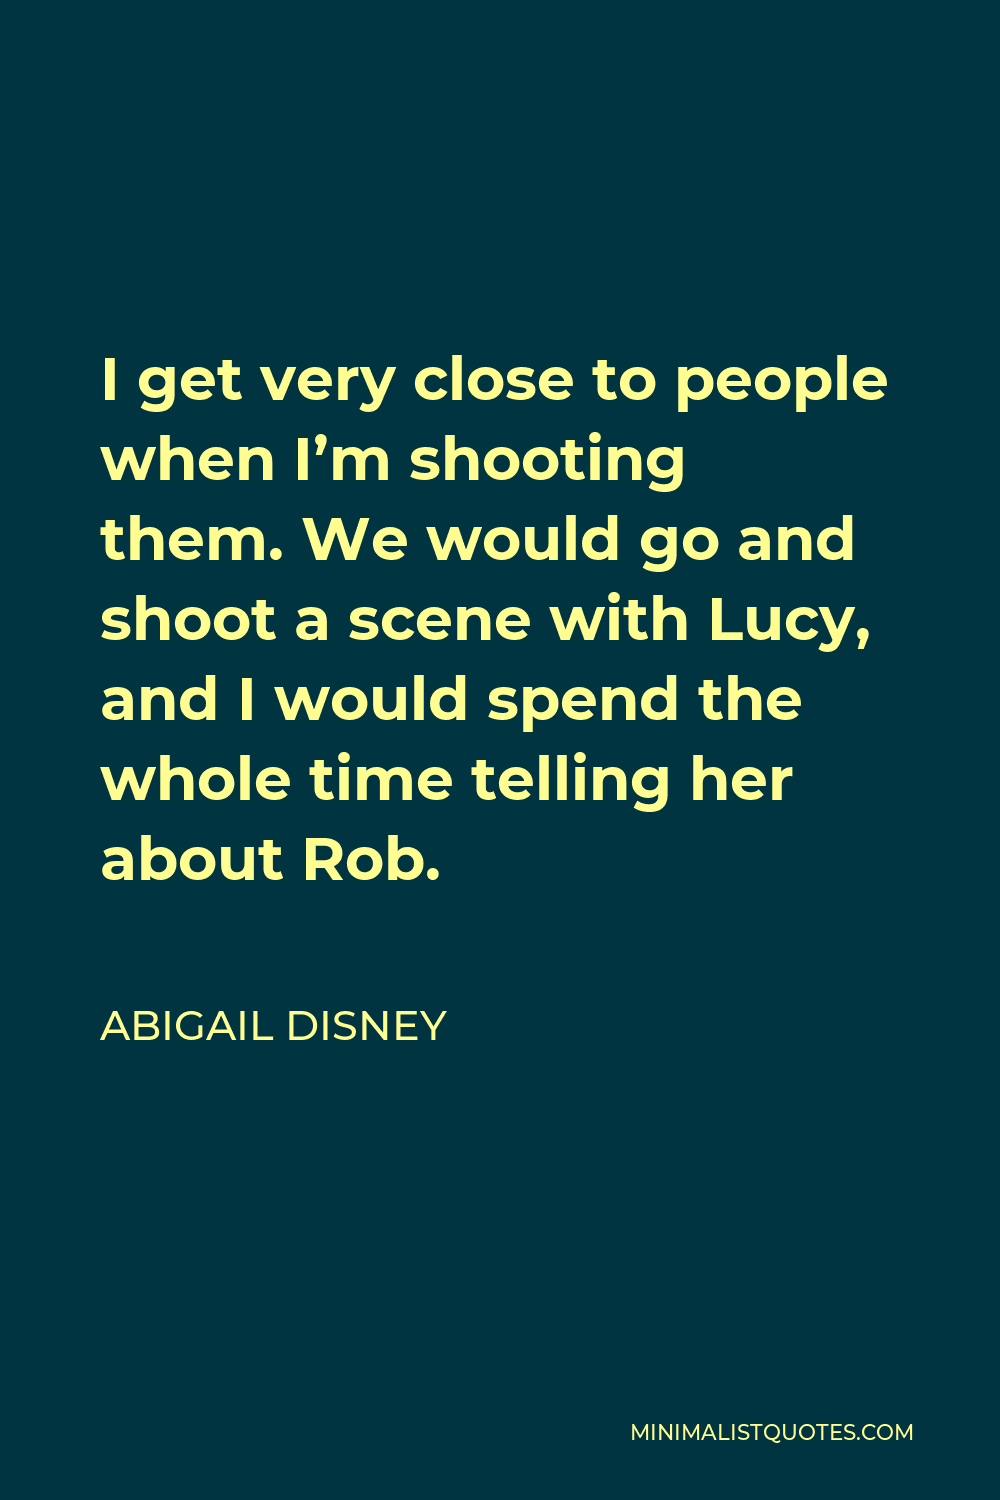 Abigail Disney Quote - I get very close to people when I’m shooting them. We would go and shoot a scene with Lucy, and I would spend the whole time telling her about Rob.